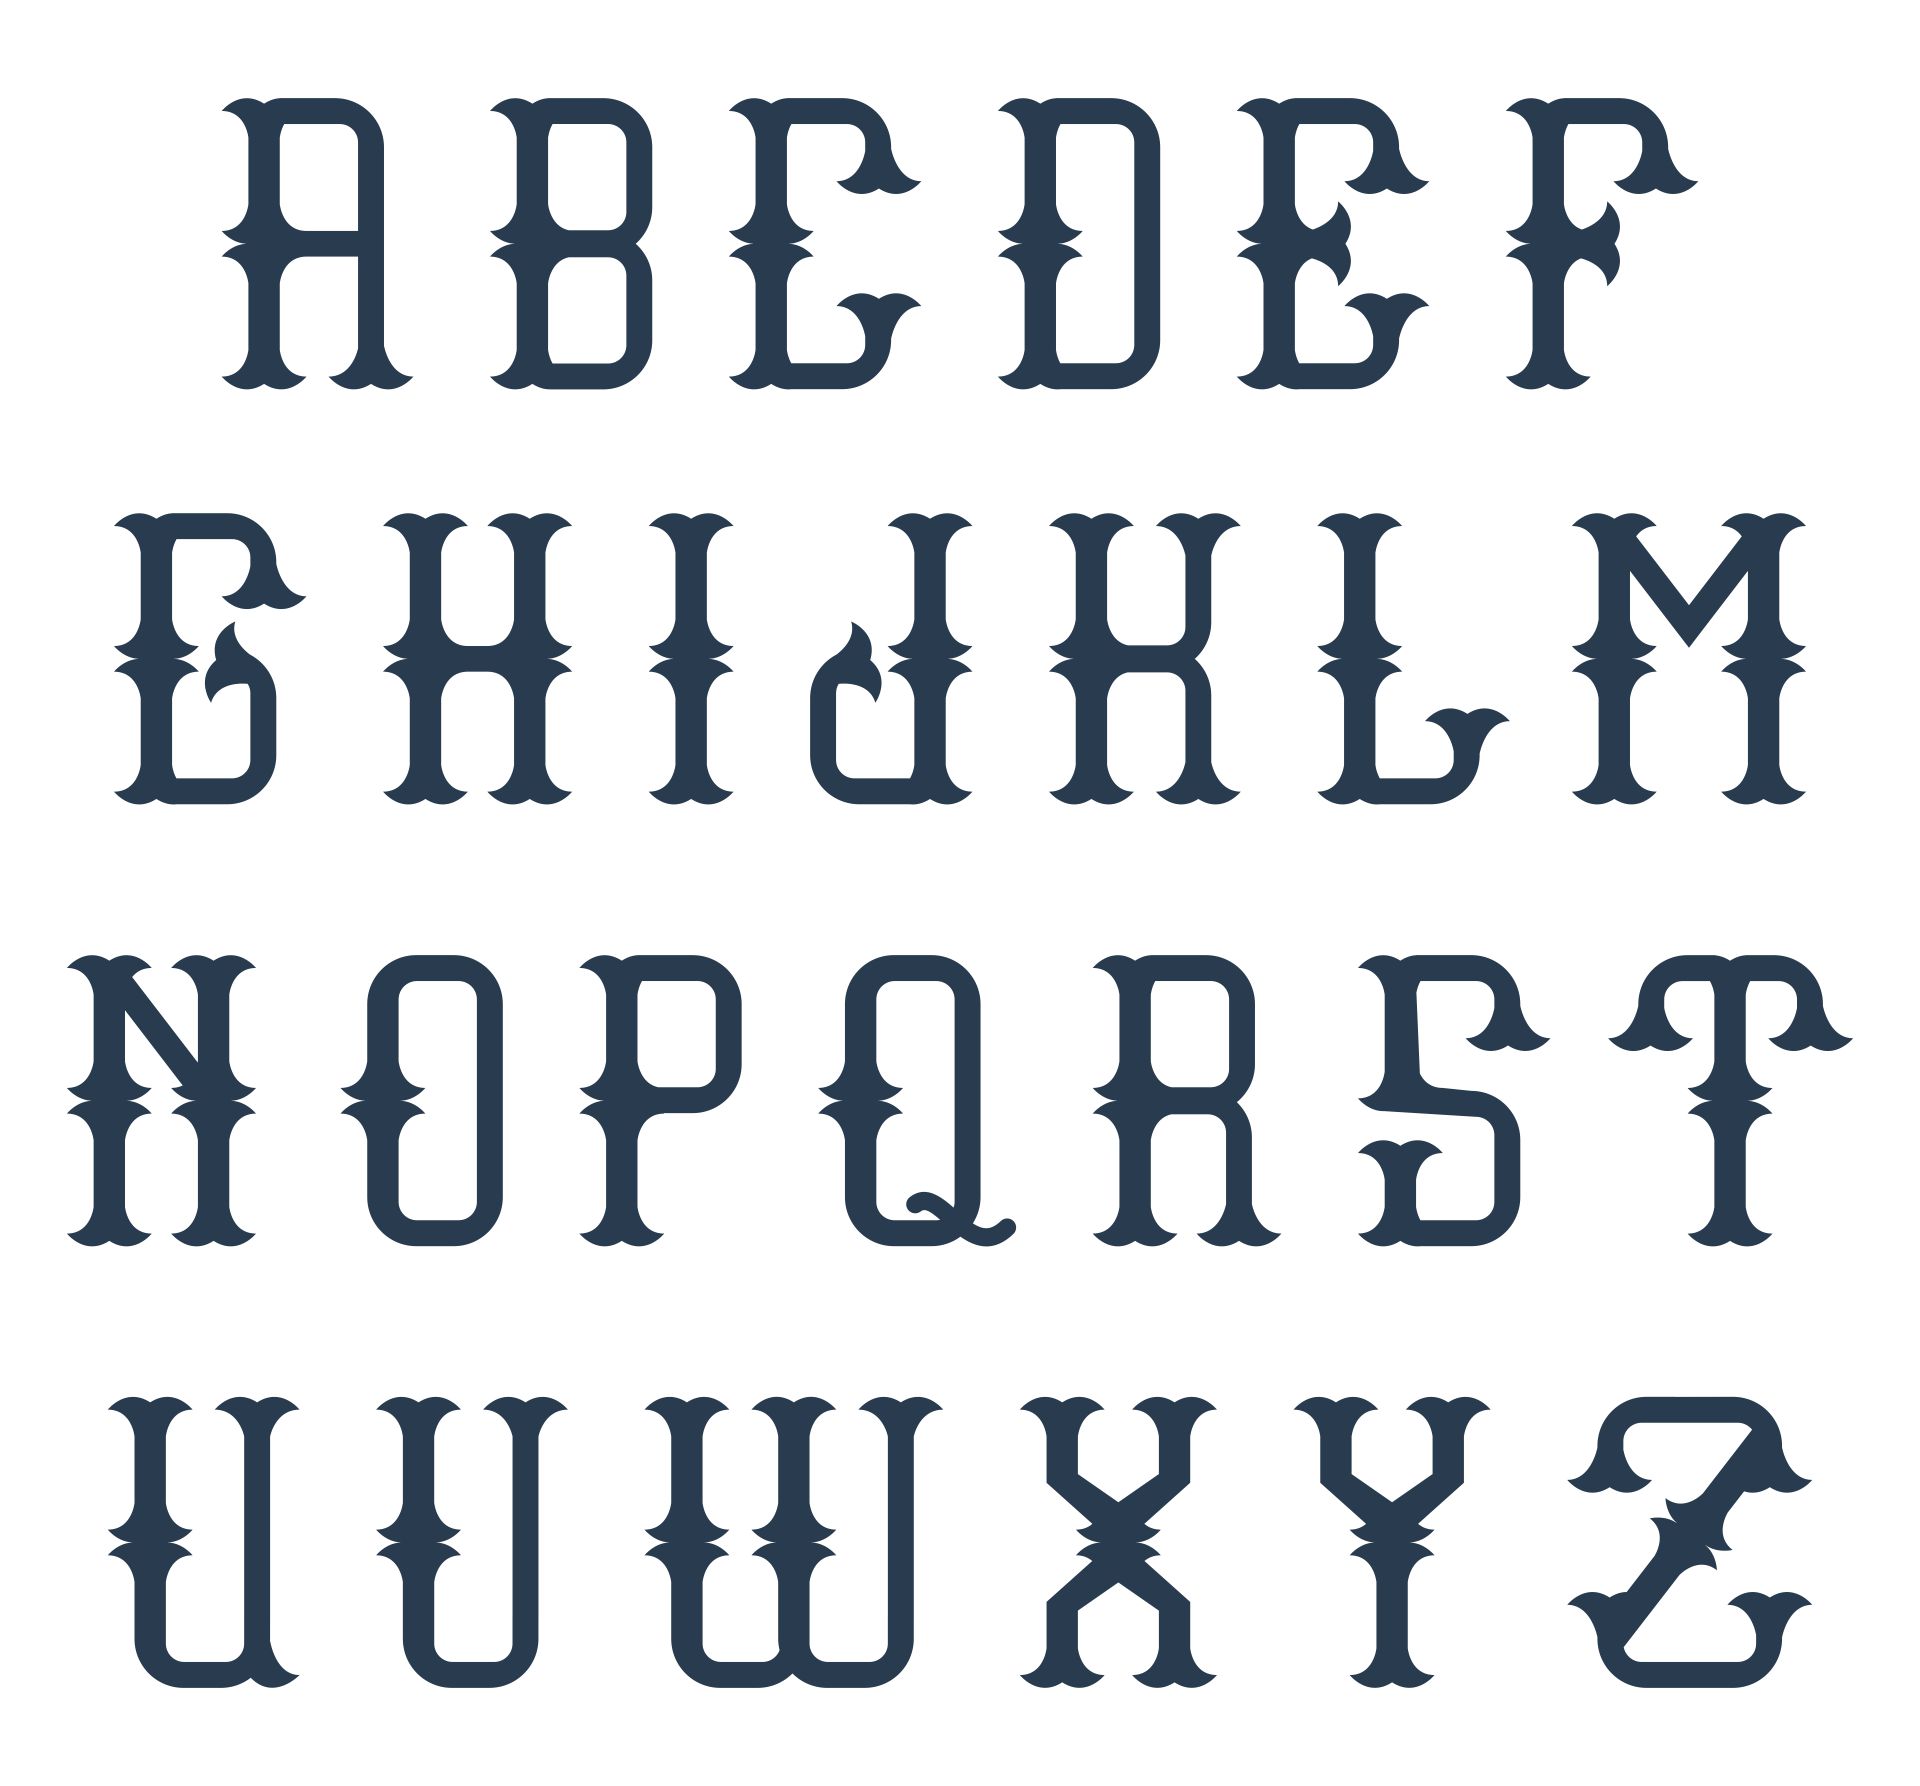 8-best-images-of-printable-letters-in-different-fonts-cool-font